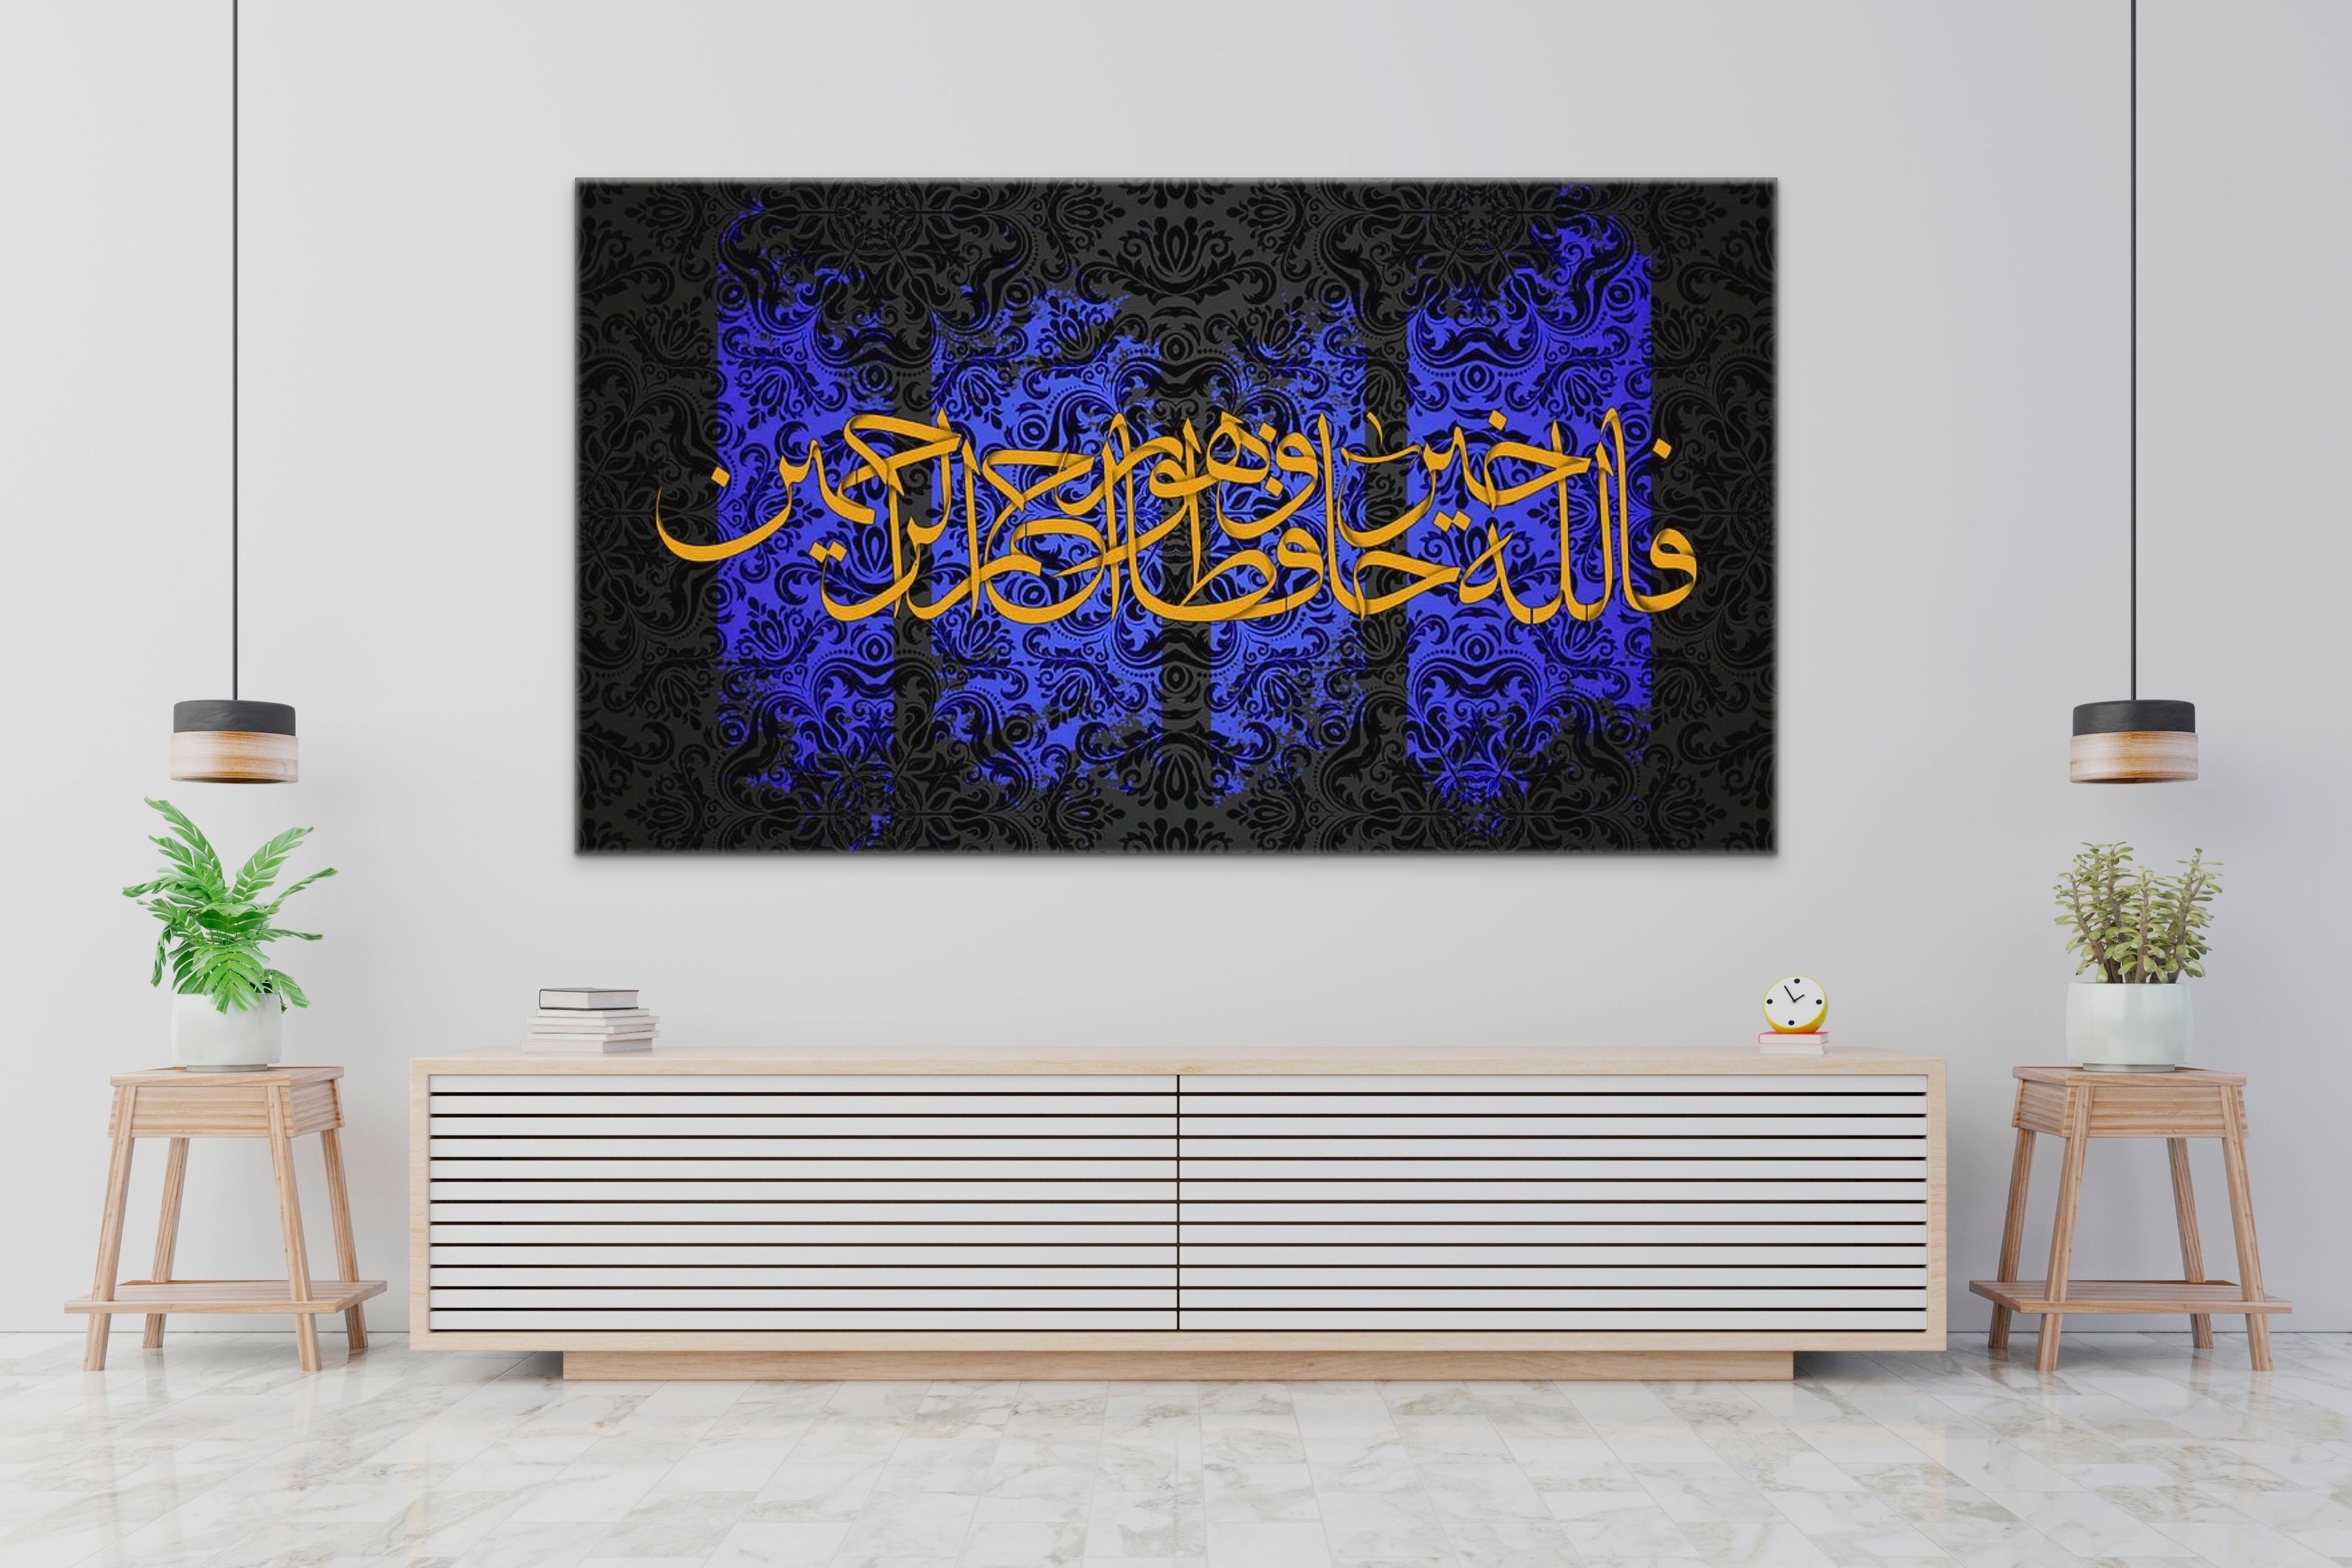 "But Allah Is The Best To Take Care" Calligraphy on Canvas - Islamic Art Ltd